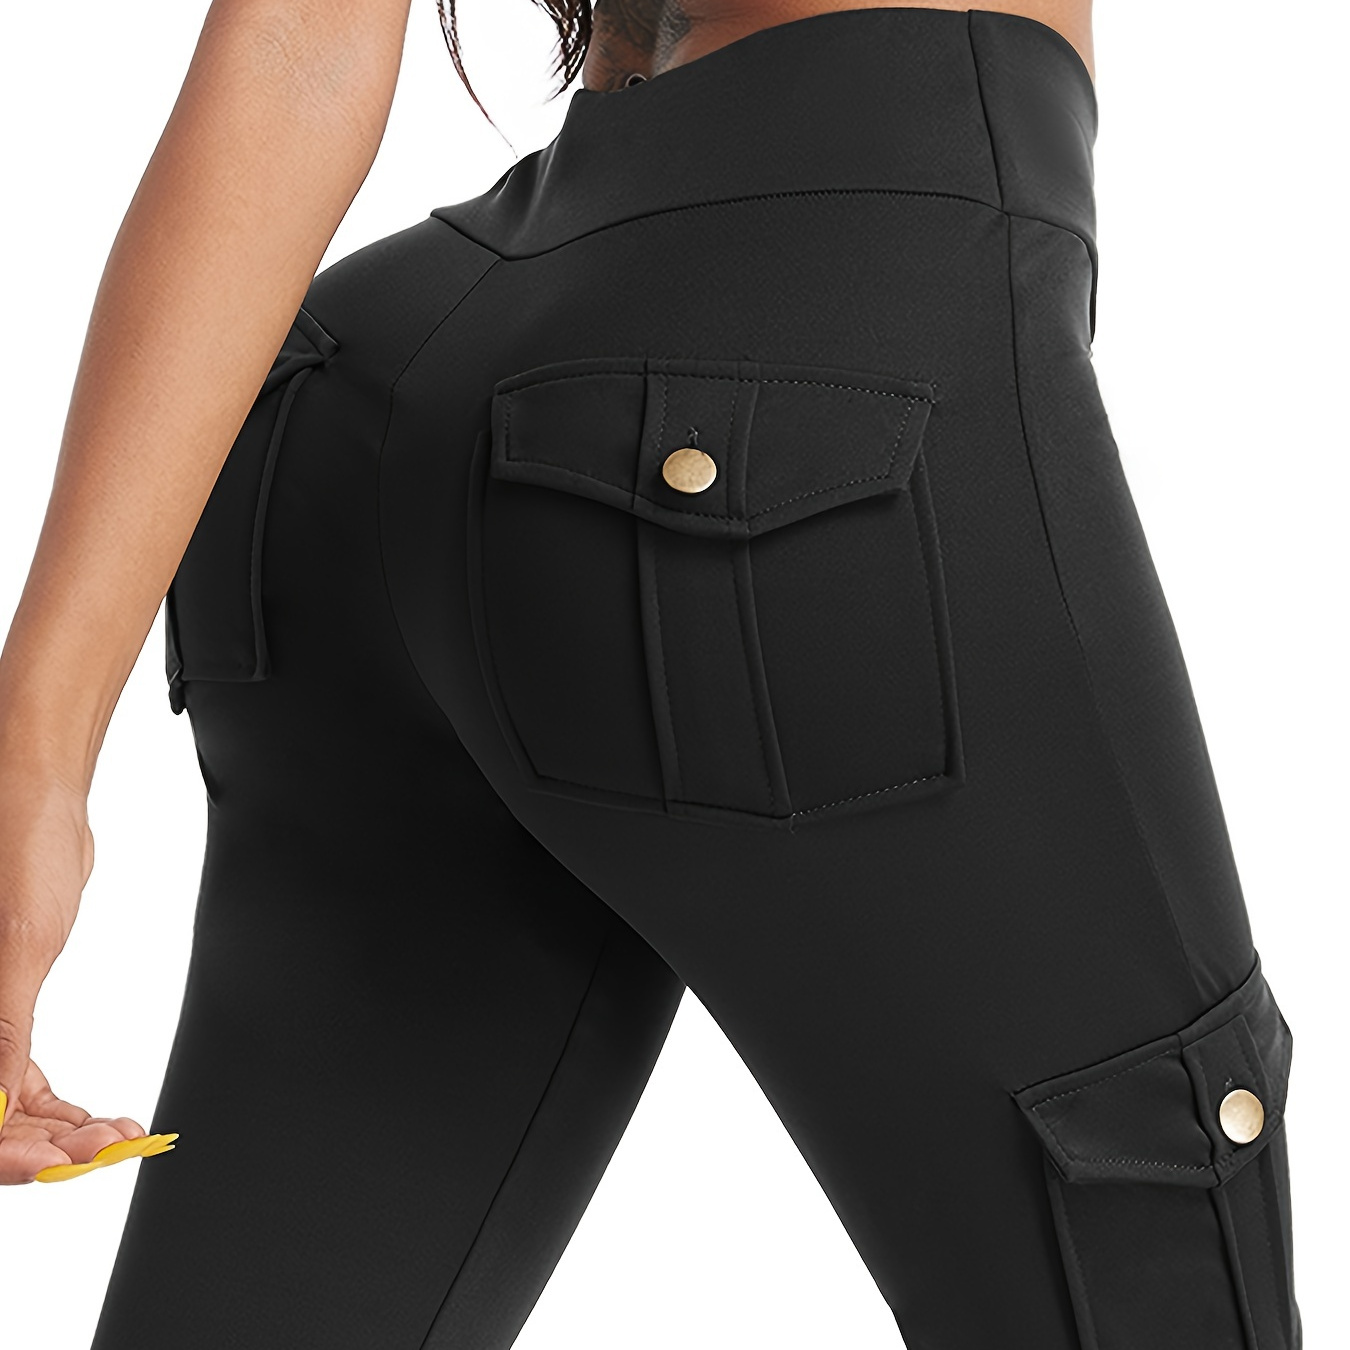 

Super Comfy & Stylish Yoga Leggings With Multi Pockets - Perfect For Running & Gym Workouts!